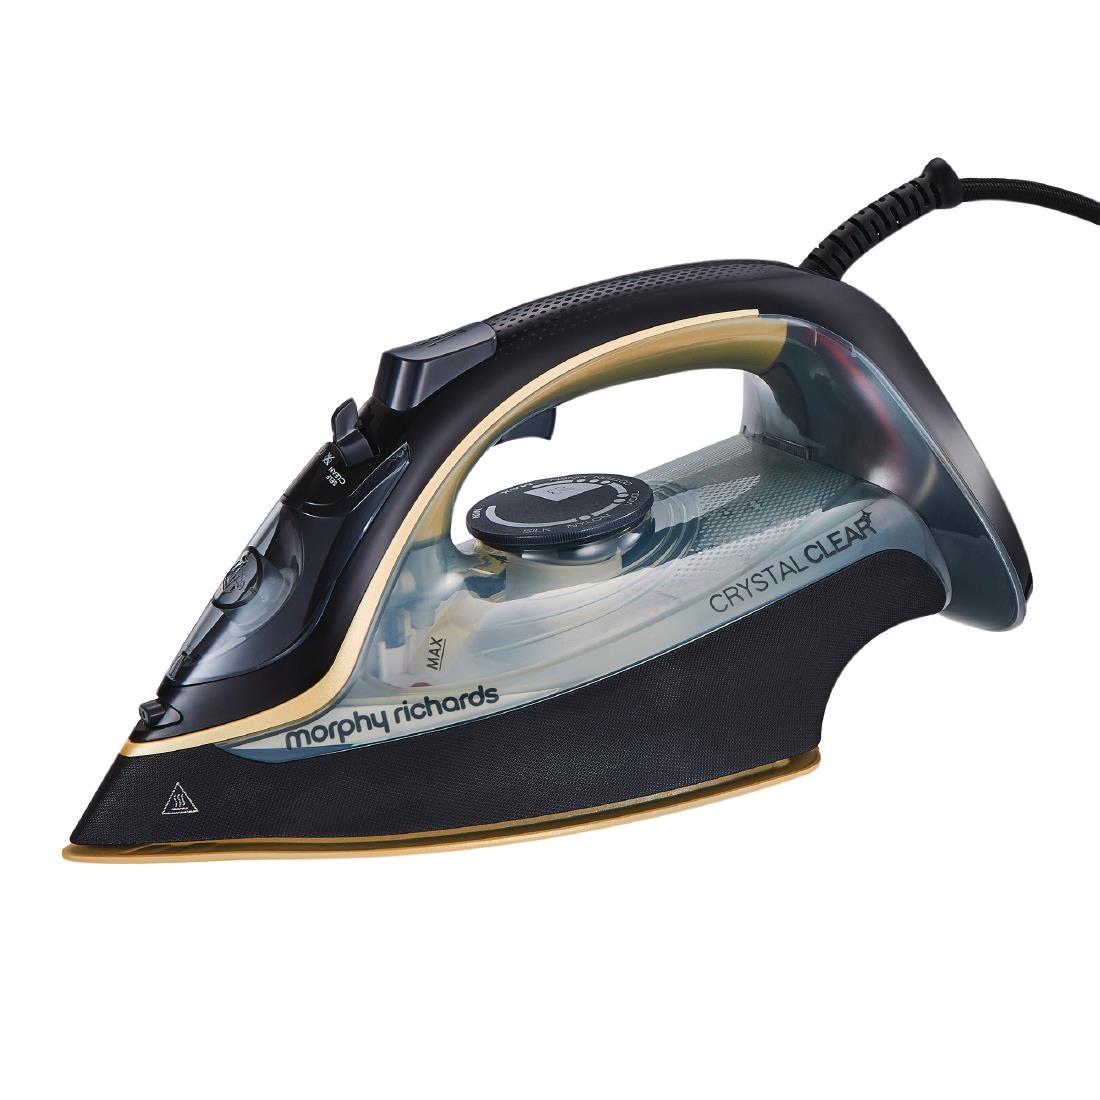 Morphy Richards Crystal Clear Steam Iron 300302 - FP912  - 1